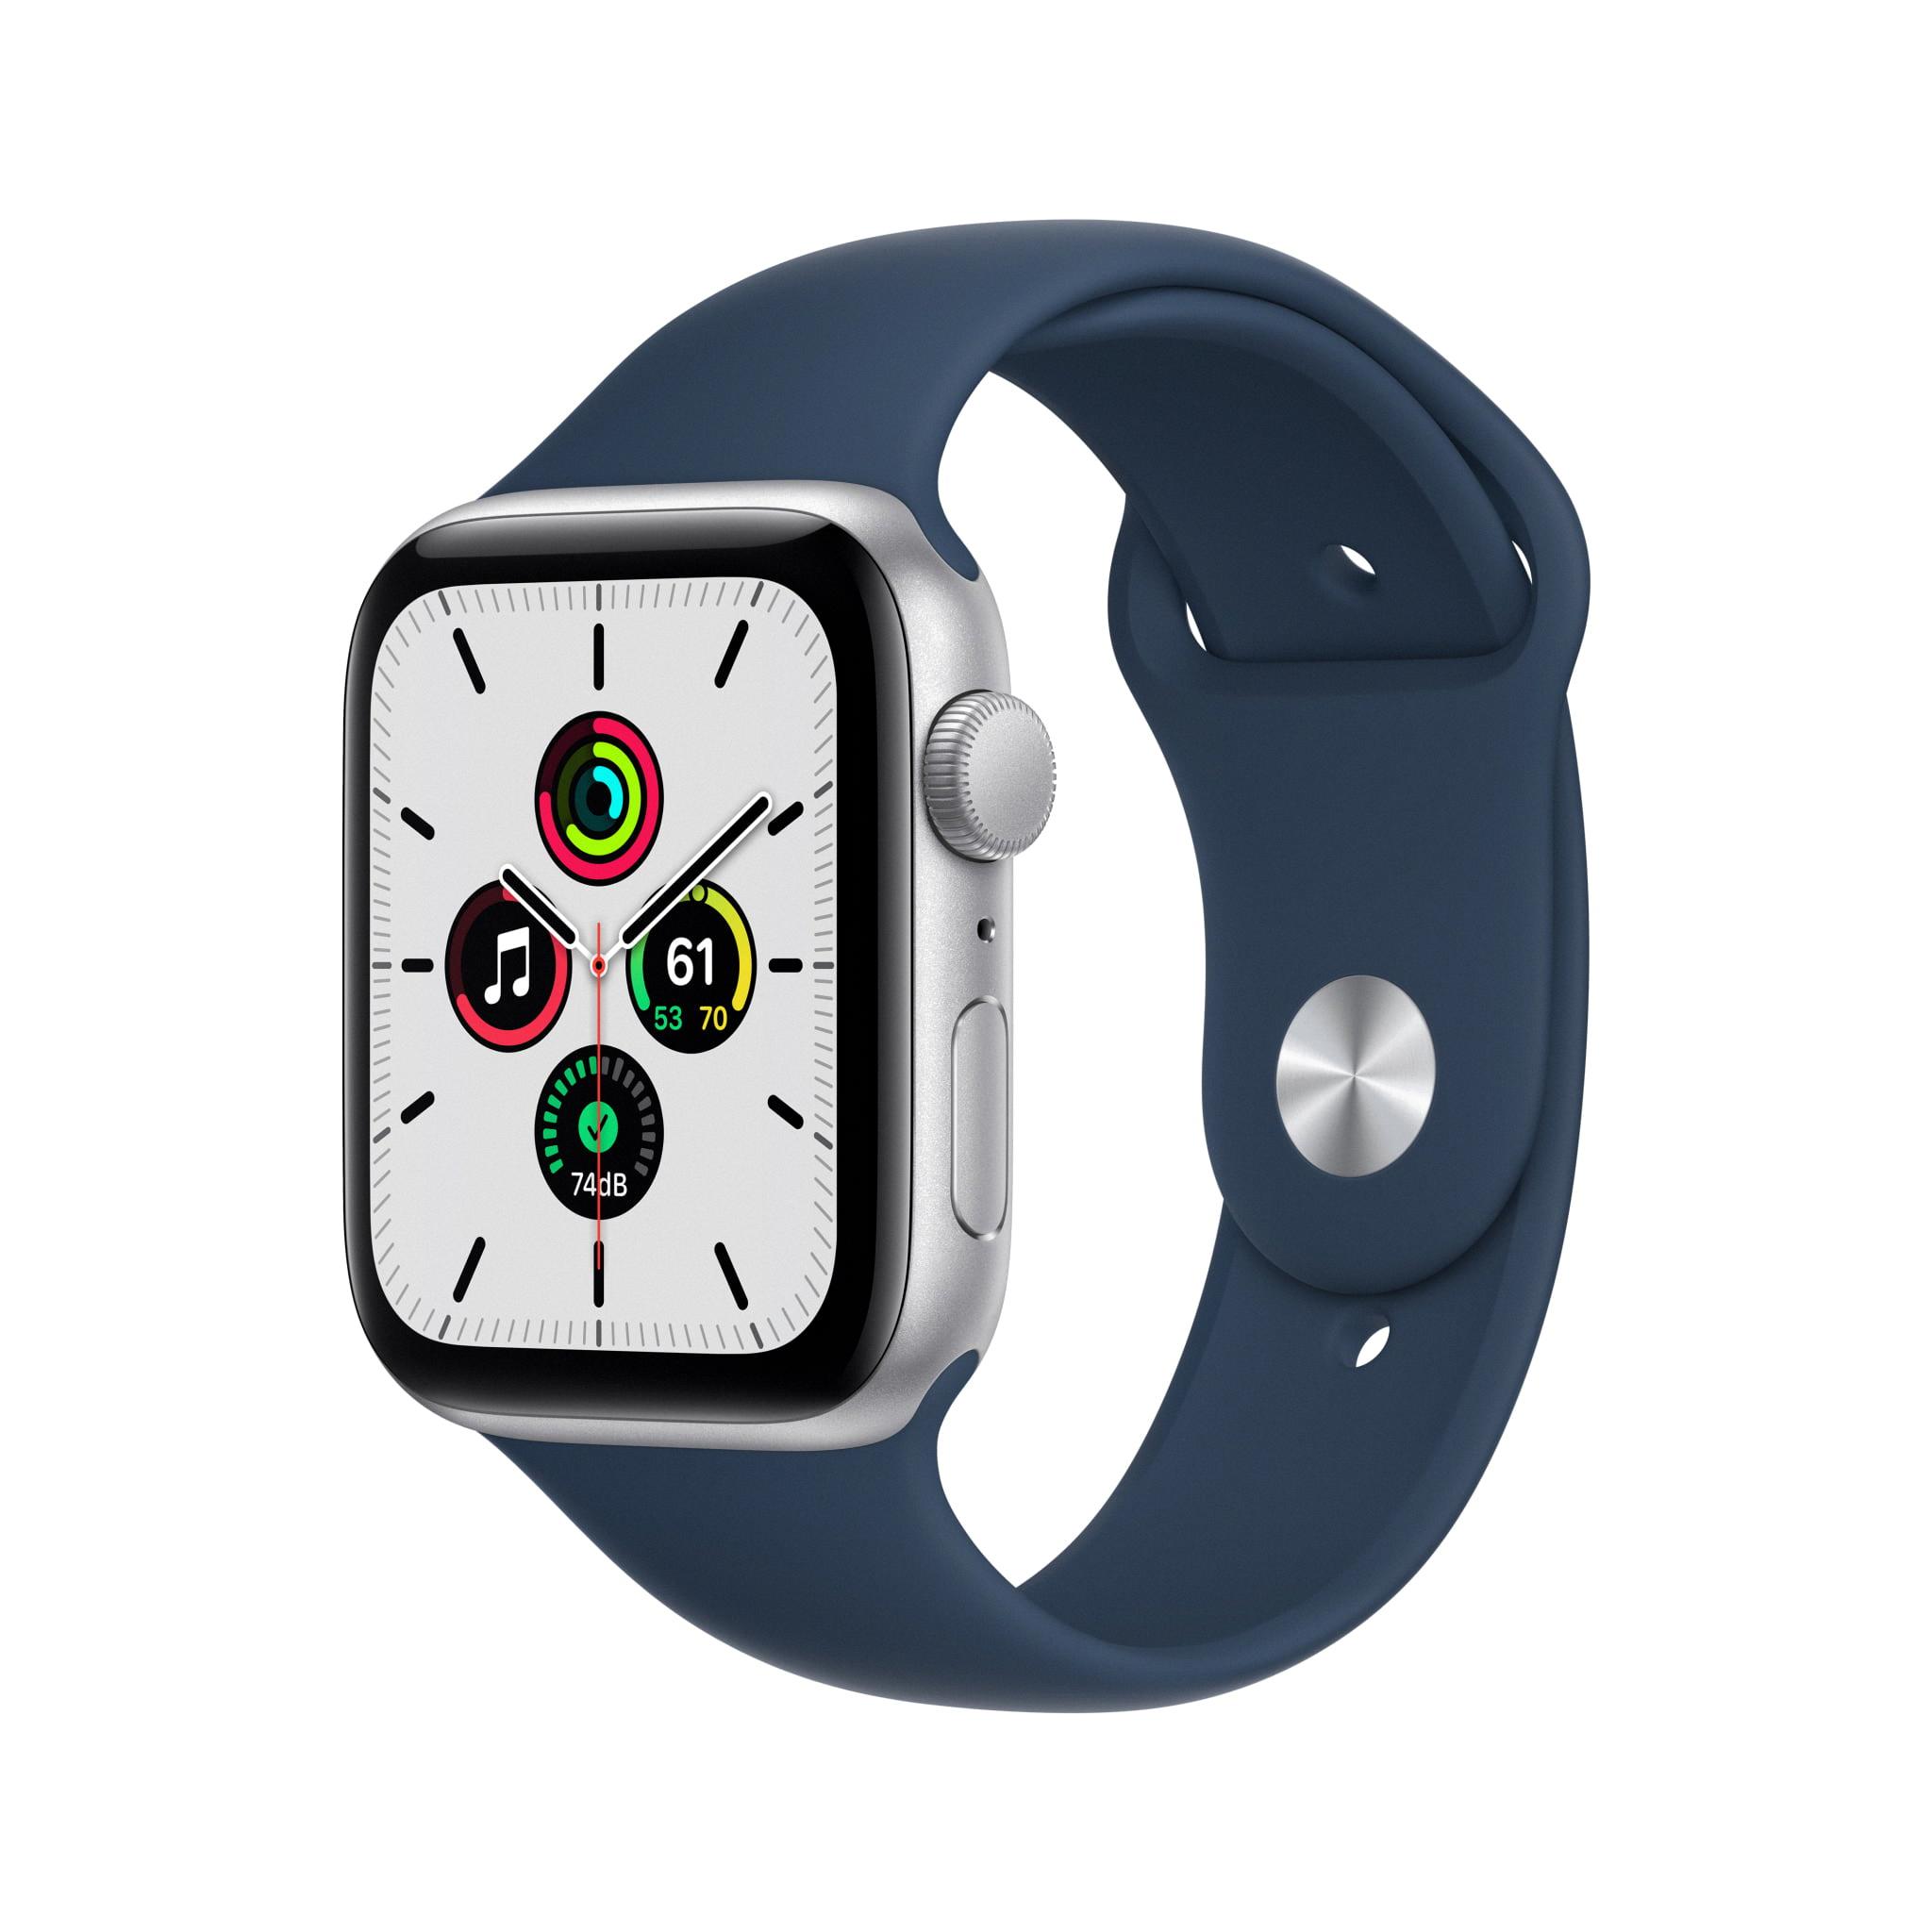 How To Change Apple Watch Time To 12 Hour 16